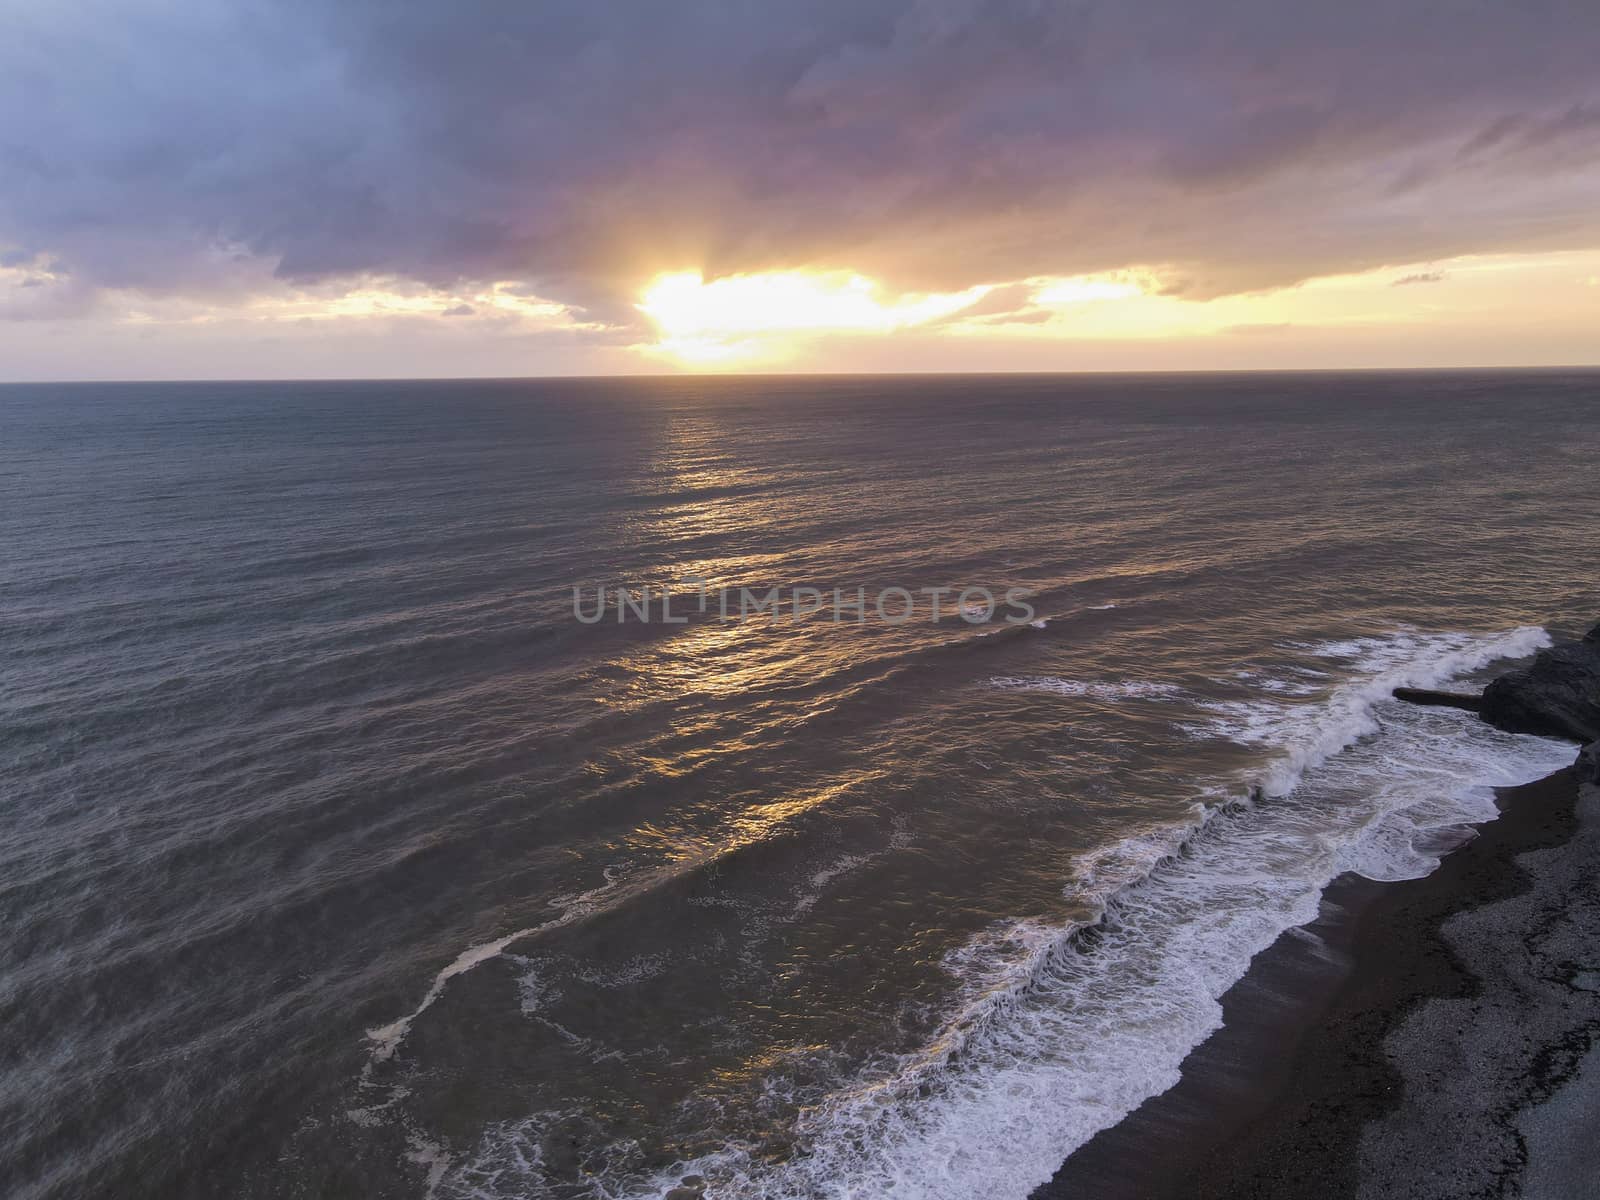 A ocean sunset at Aberystwyth, Ceredigion, Wales, UK. A coastal view of the sun setting over the Irish Sea.